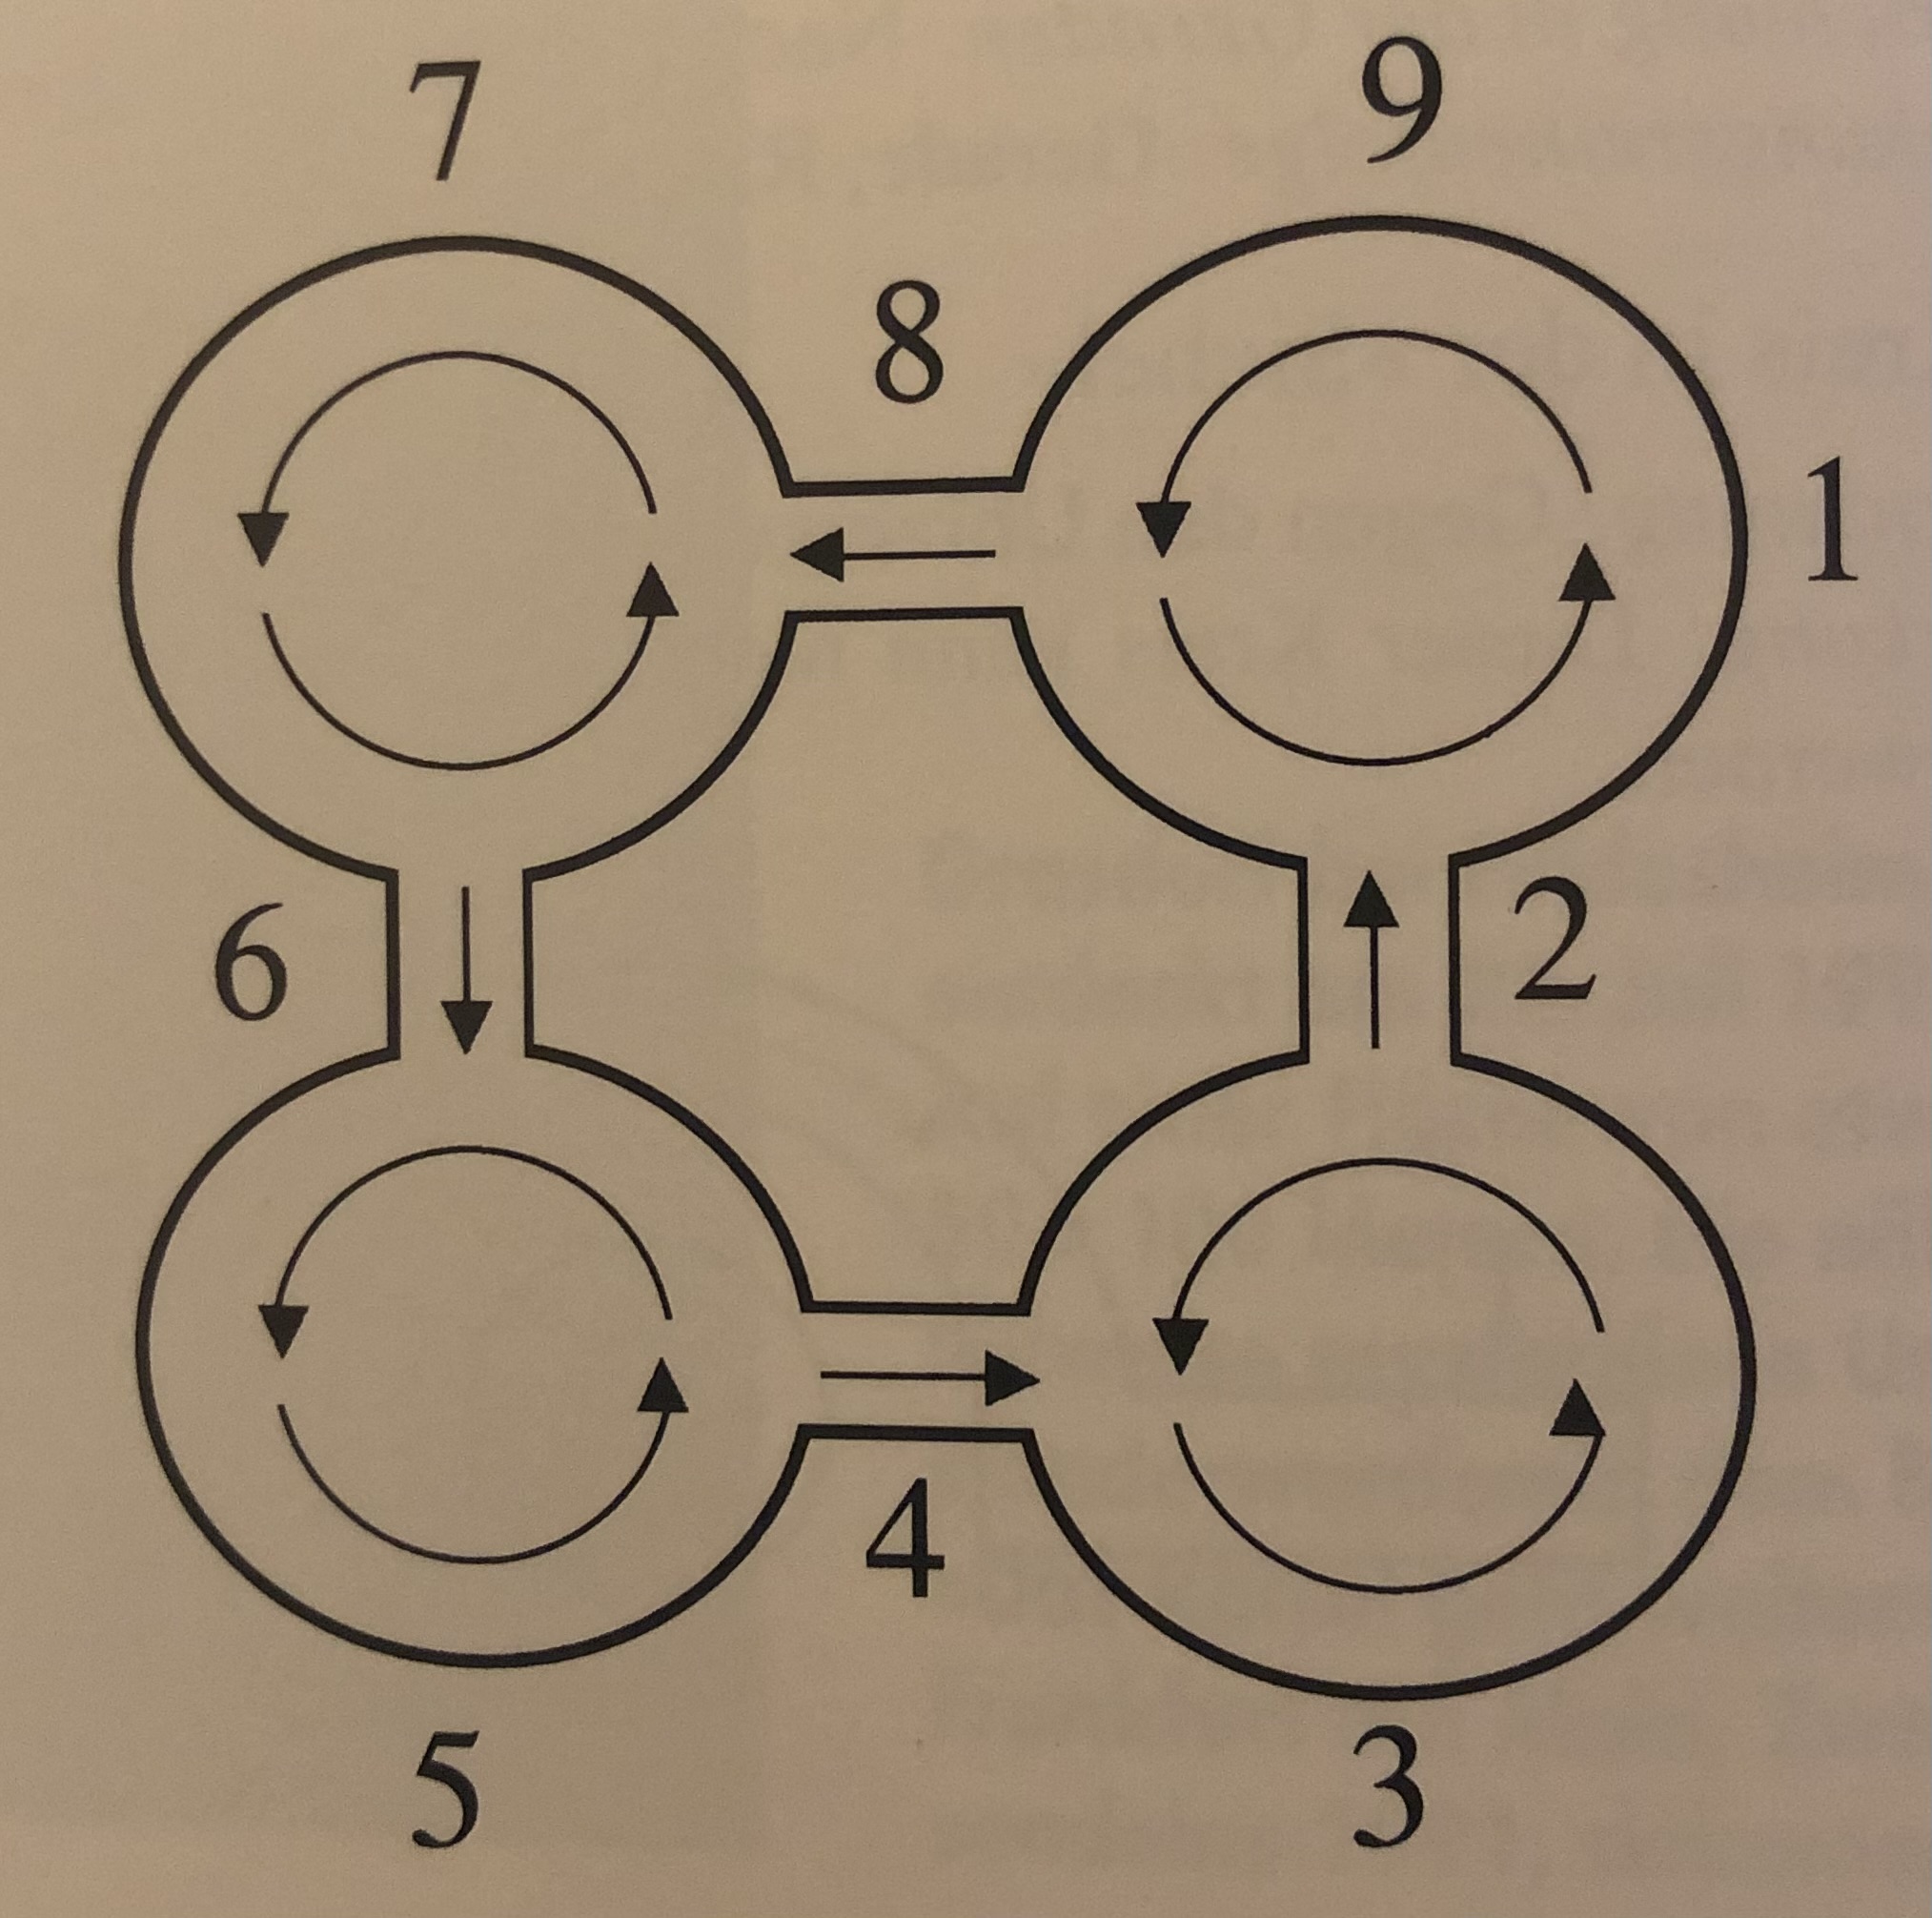 A diagram illustration of 4 circular shapes arranged in a square connected with 4 passages. Numbers 1-9 are arranged around the circle formation clockwise. Inside each circle two arrows form a circle pointing to each other’s ends. Arrows move through each of the passages connecting the circles counter clockwise.